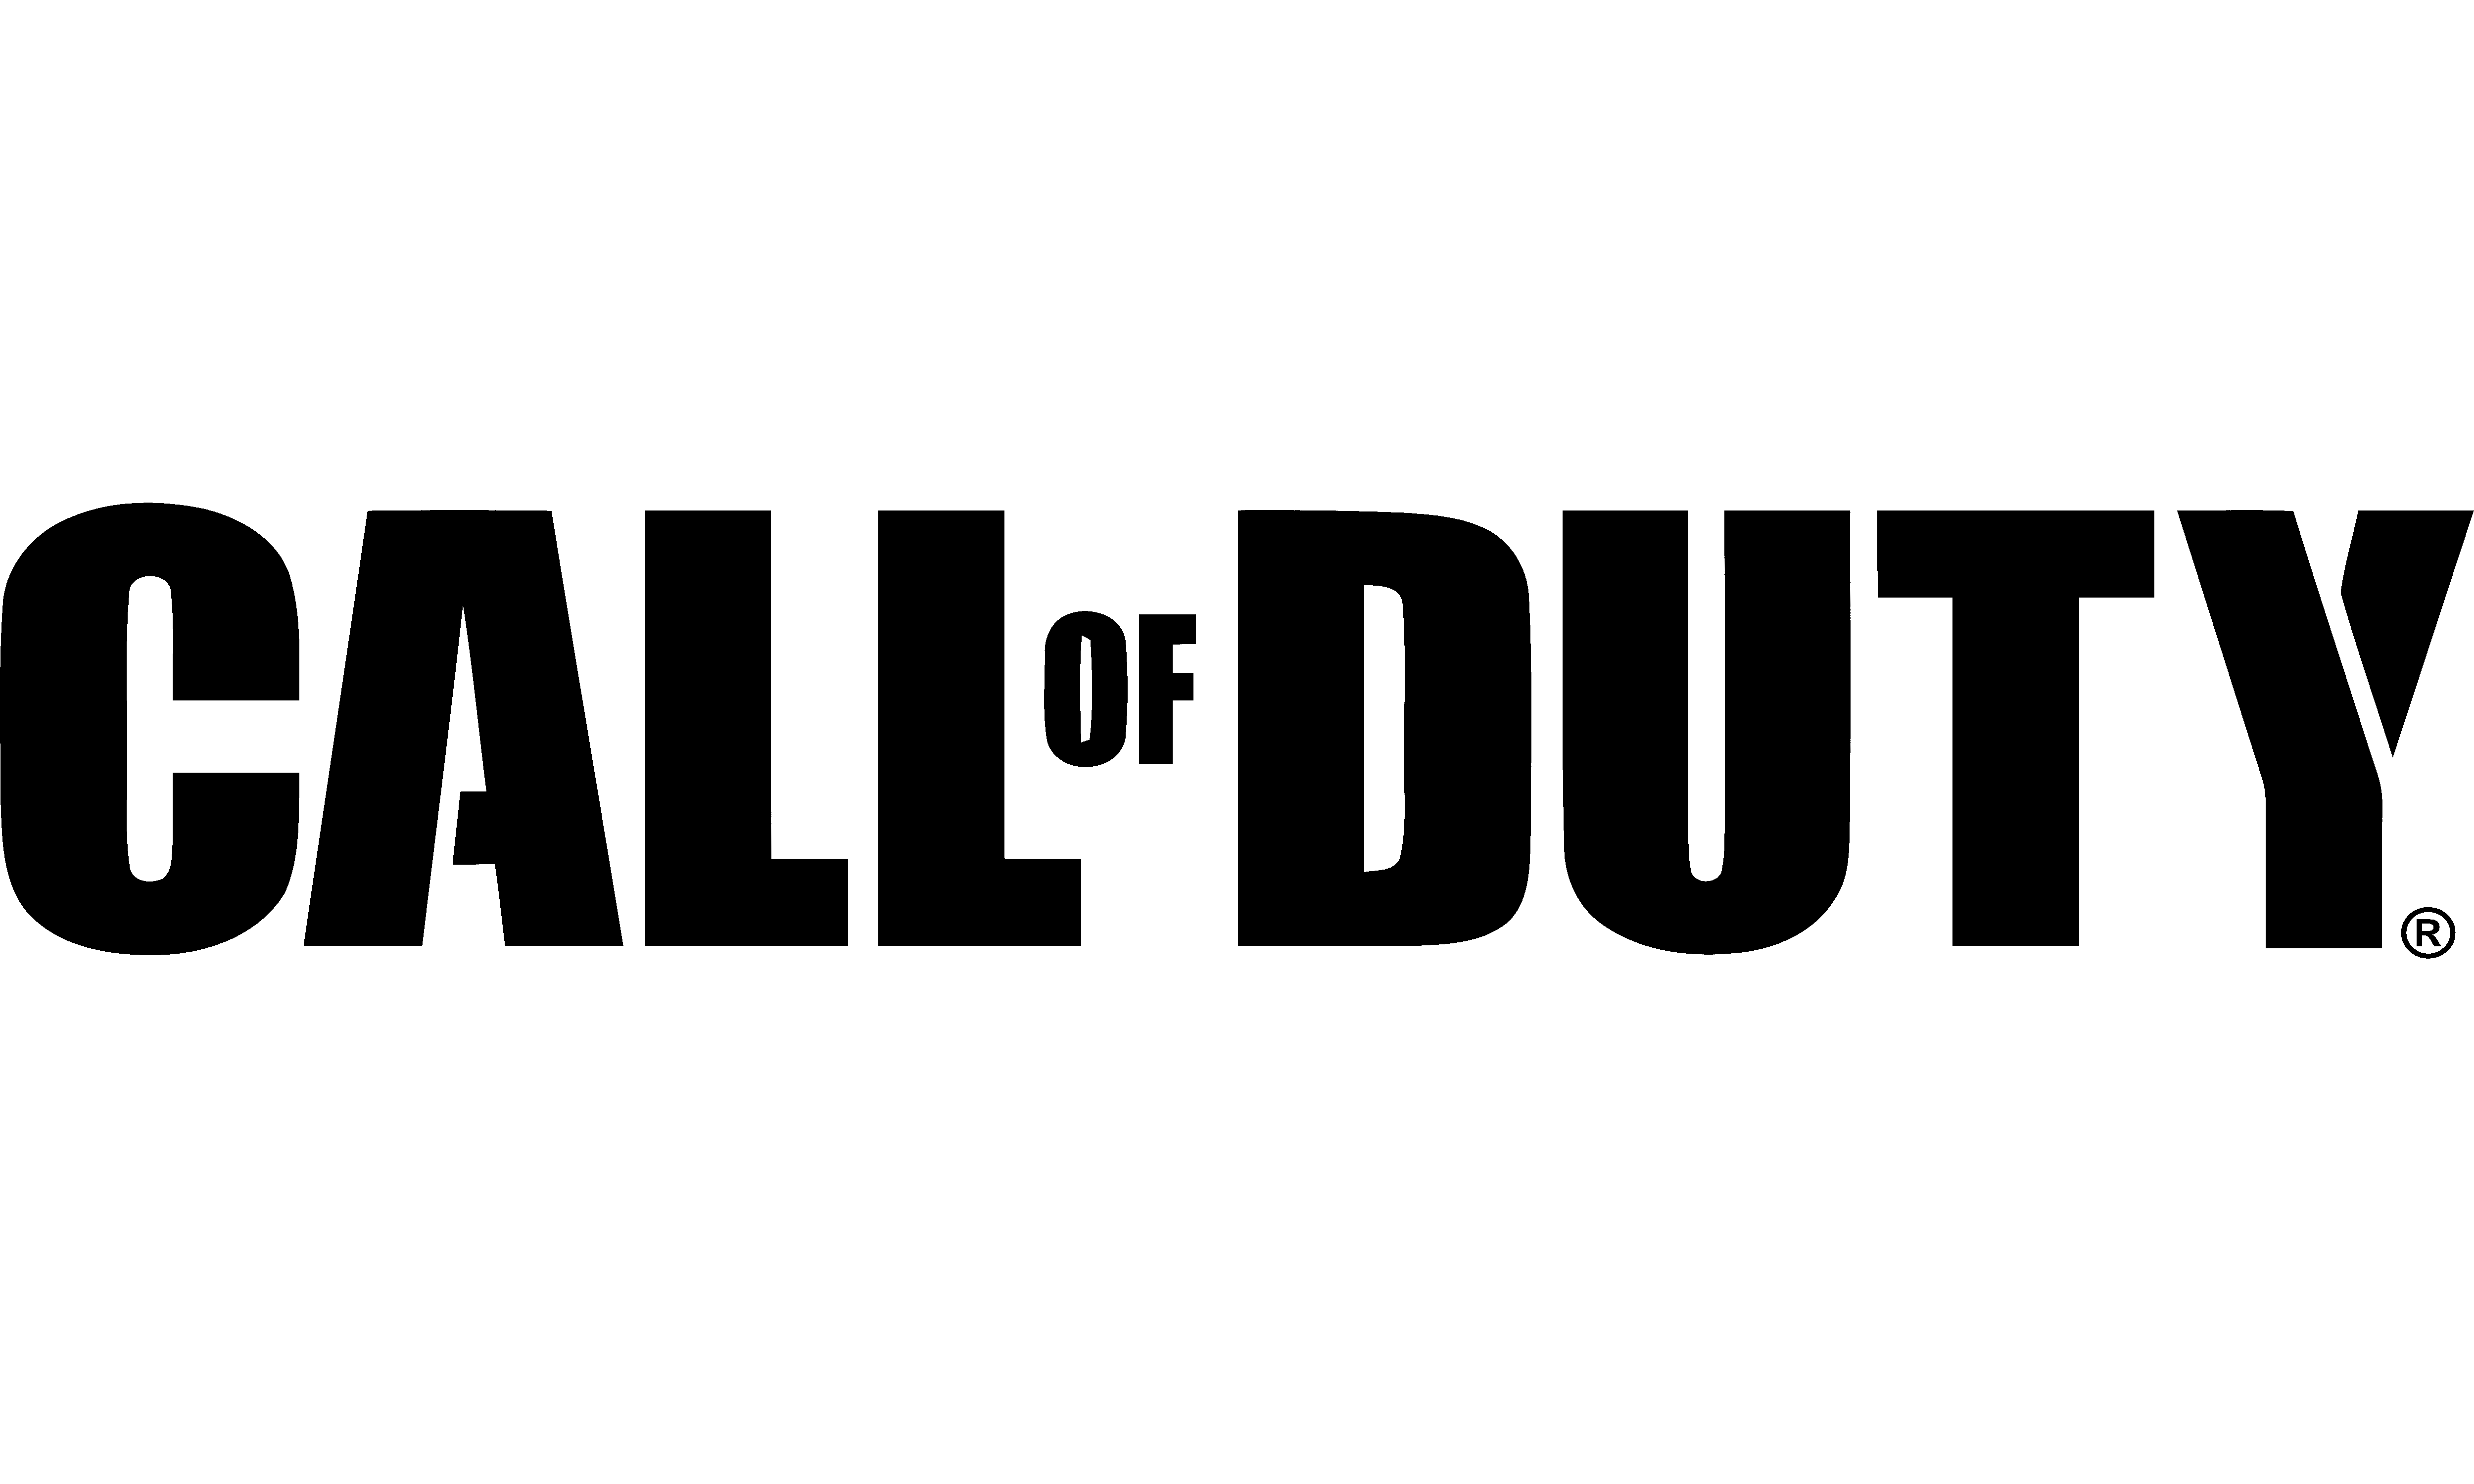 Call of Duty Black Ops logo, Vector Logo of Call of Duty Black Ops brand  free download (eps, ai, png, cdr) formats